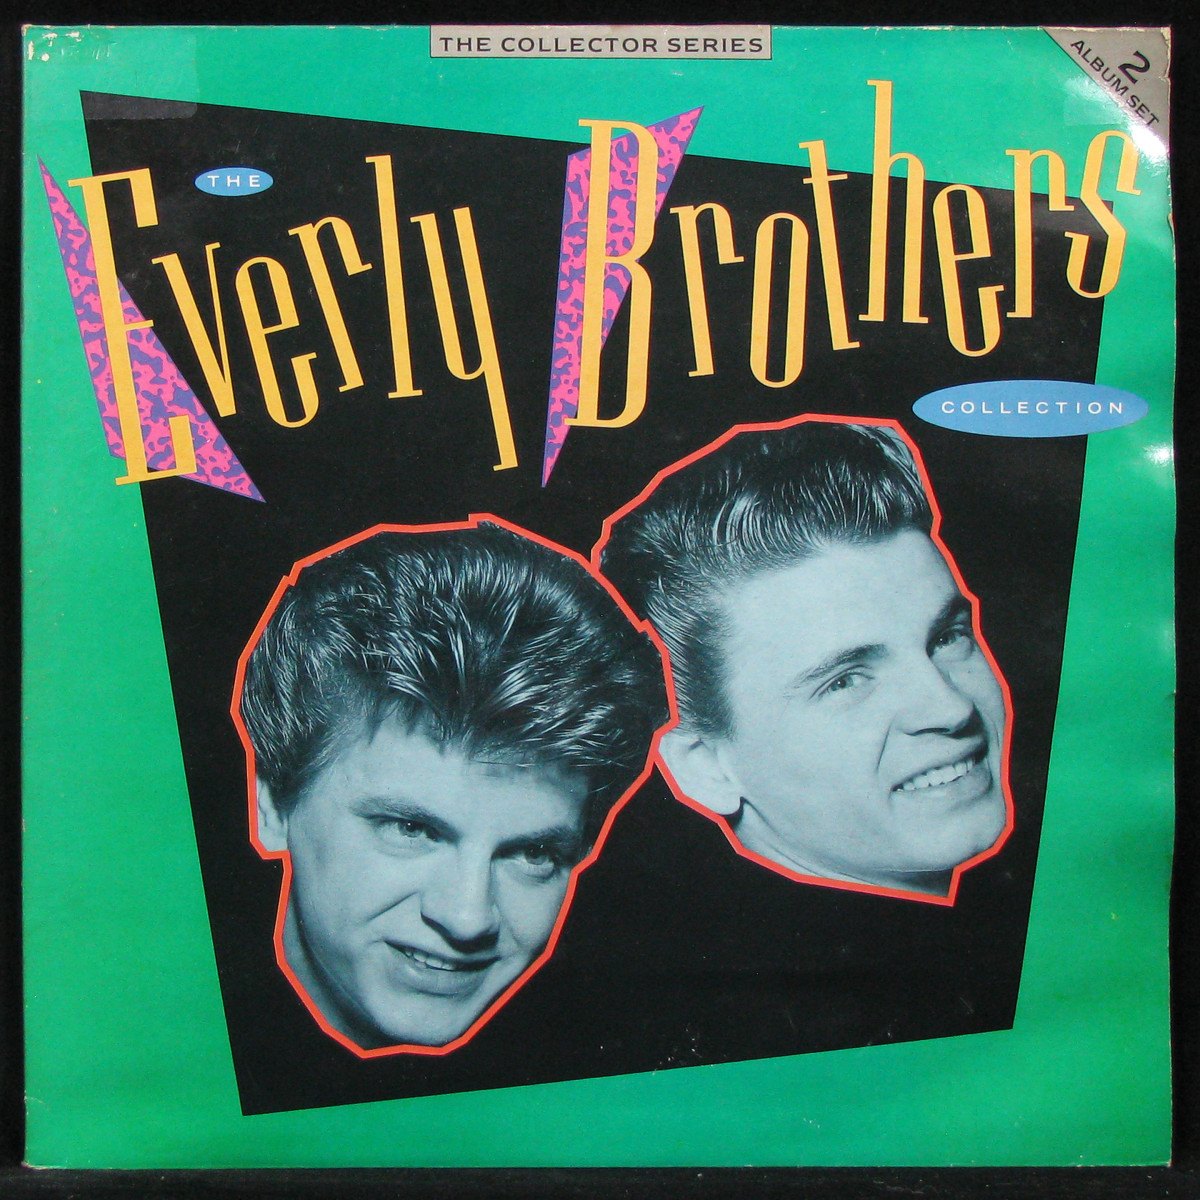 Everly Brothers Collection